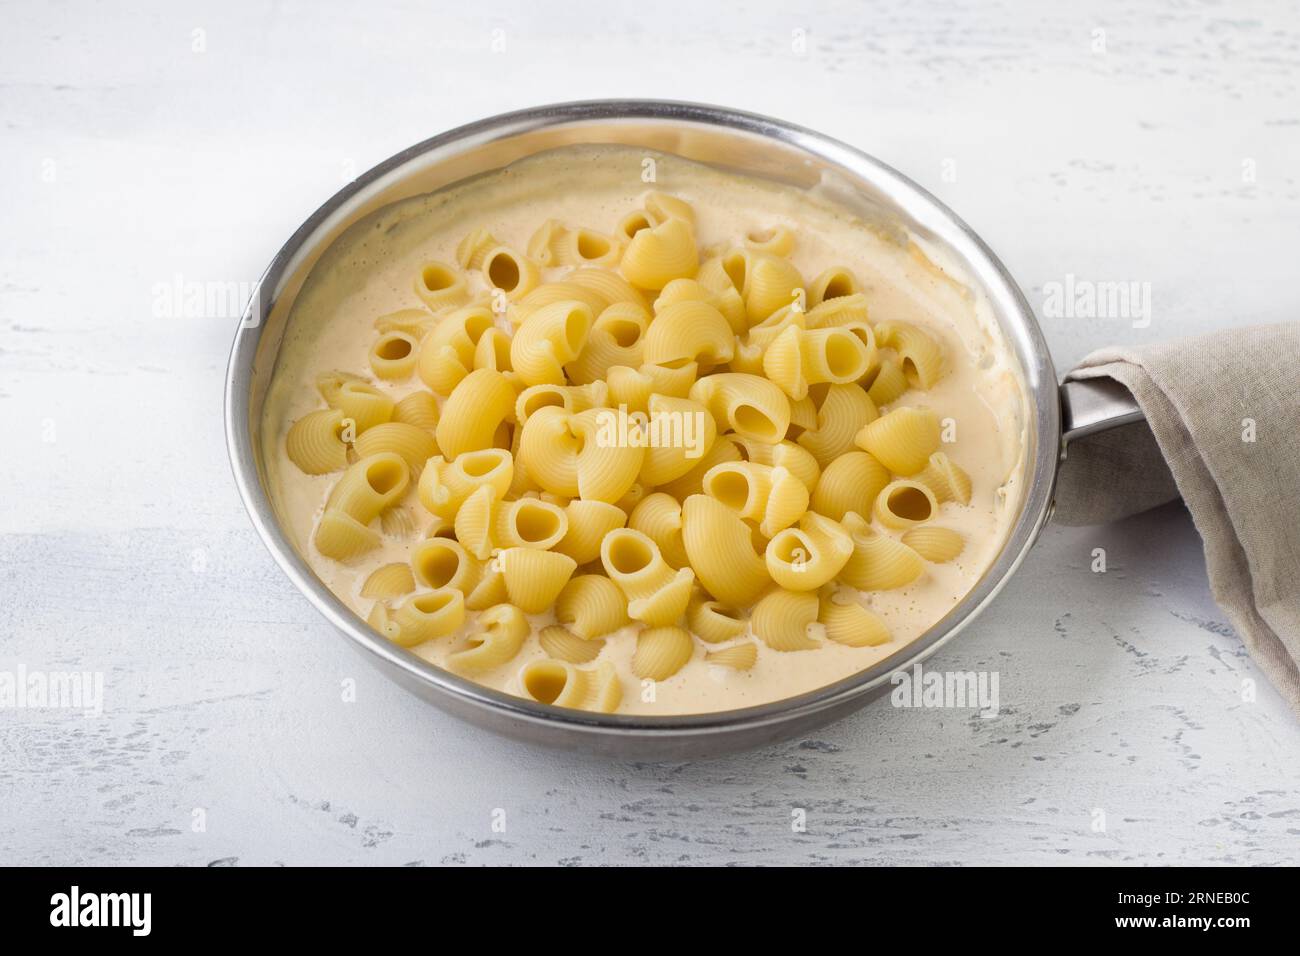 Cooking mac and cheese, American pasta. Adding cooked pasta to cheese sauce in a frying pan on a light gray background. Cooking stage Stock Photo